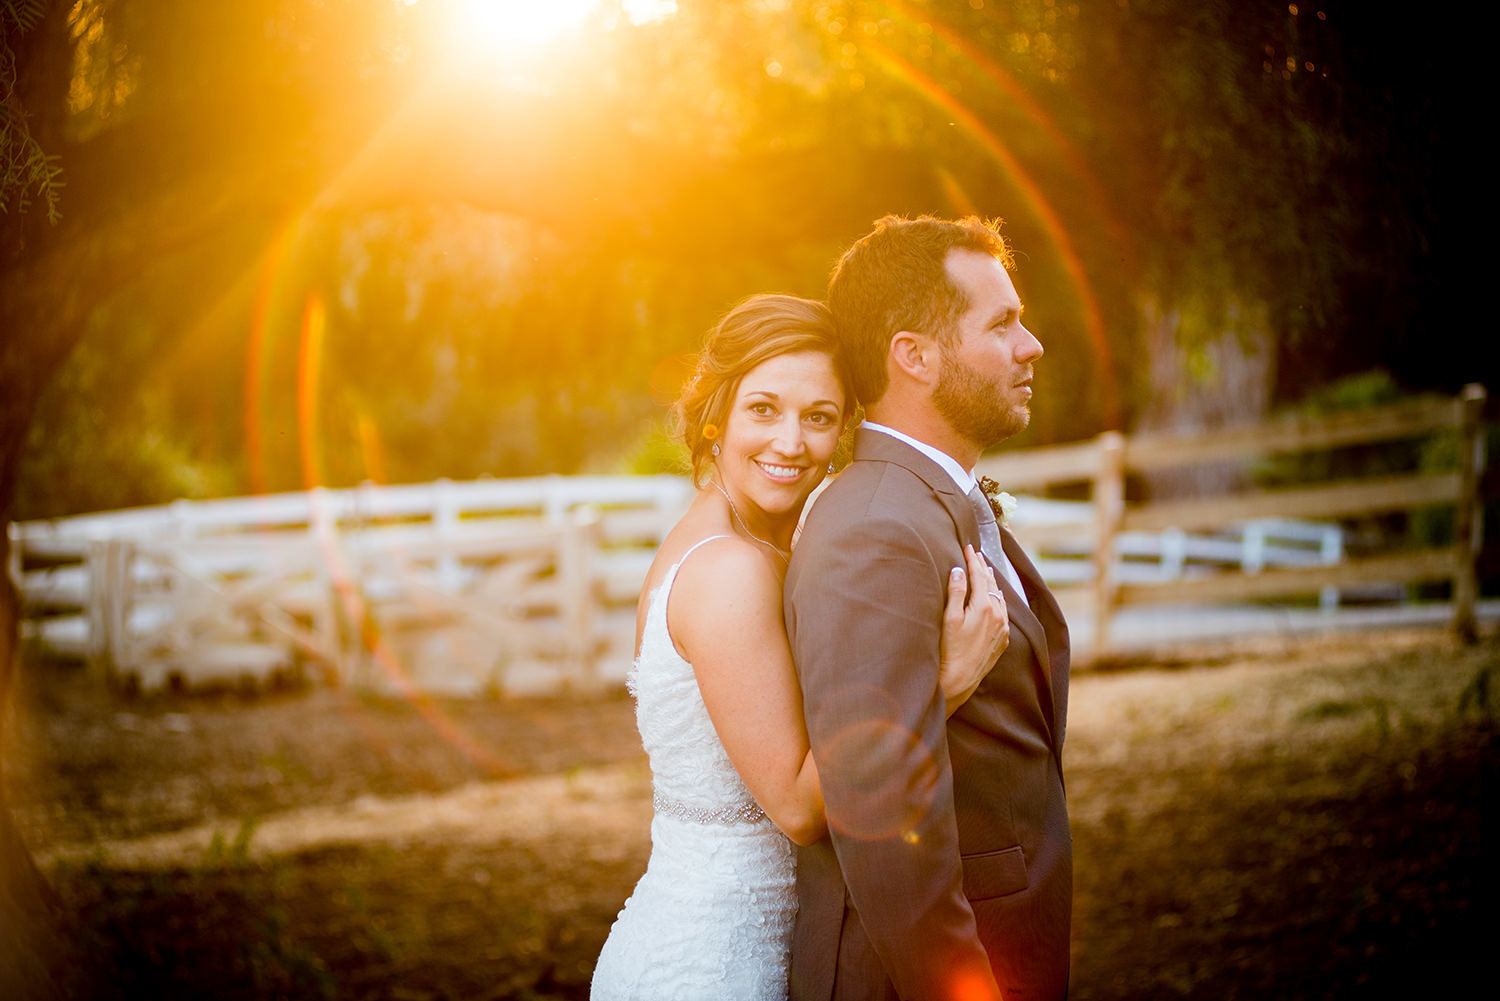 Perfect lens flare with a beautiful couple